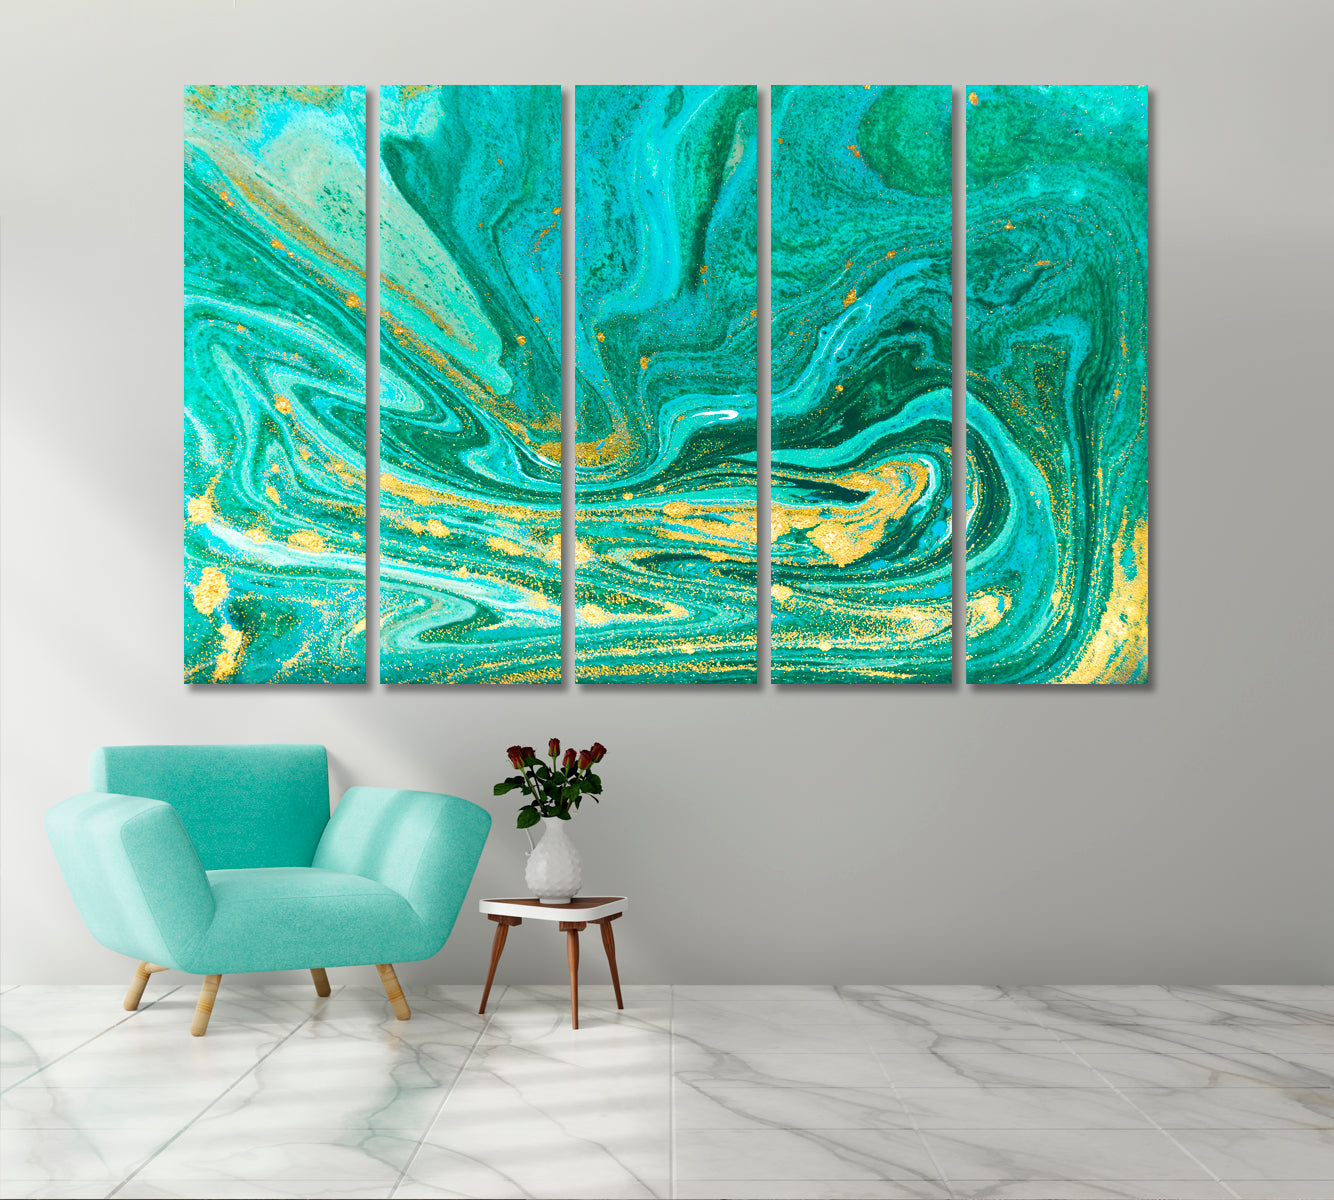 Turquoise And Gold Marble Pattern Canvas Print-Canvas Print-CetArt-5 Panels-36x24 inches-CetArt